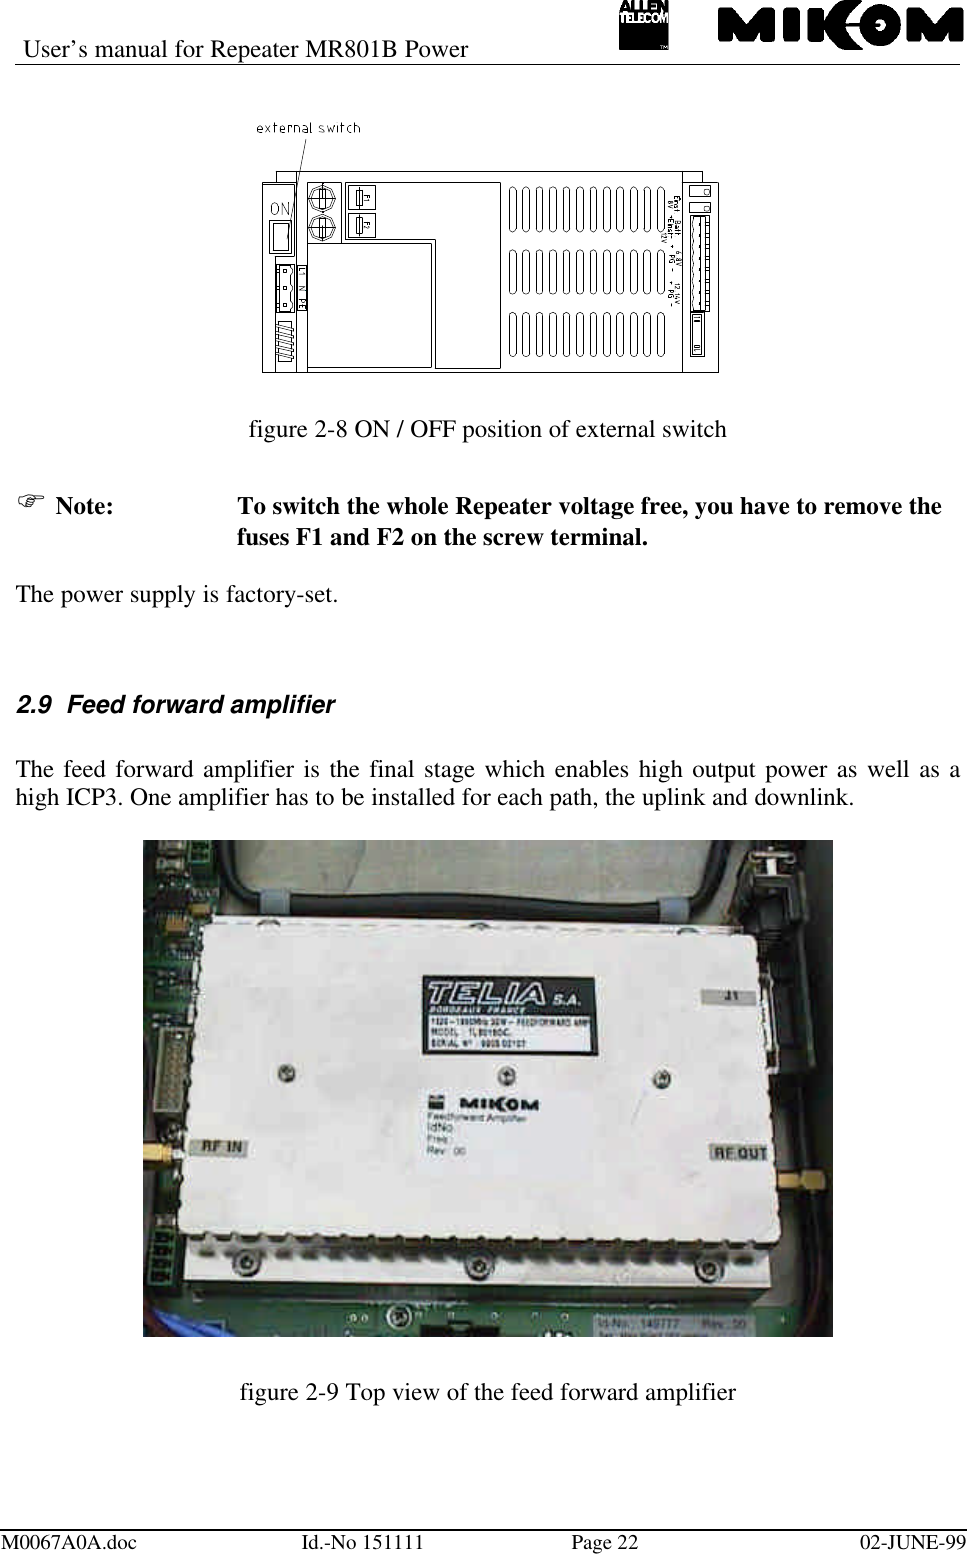 User’s manual for Repeater MR801B PowerM0067A0A.doc Id.-No 151111 Page 22 02-JUNE-99figure 2-8 ON / OFF position of external switchF Note: To switch the whole Repeater voltage free, you have to remove thefuses F1 and F2 on the screw terminal.The power supply is factory-set.2.9 Feed forward amplifierThe feed forward amplifier is the final stage which enables high output power as well as ahigh ICP3. One amplifier has to be installed for each path, the uplink and downlink.figure 2-9 Top view of the feed forward amplifier